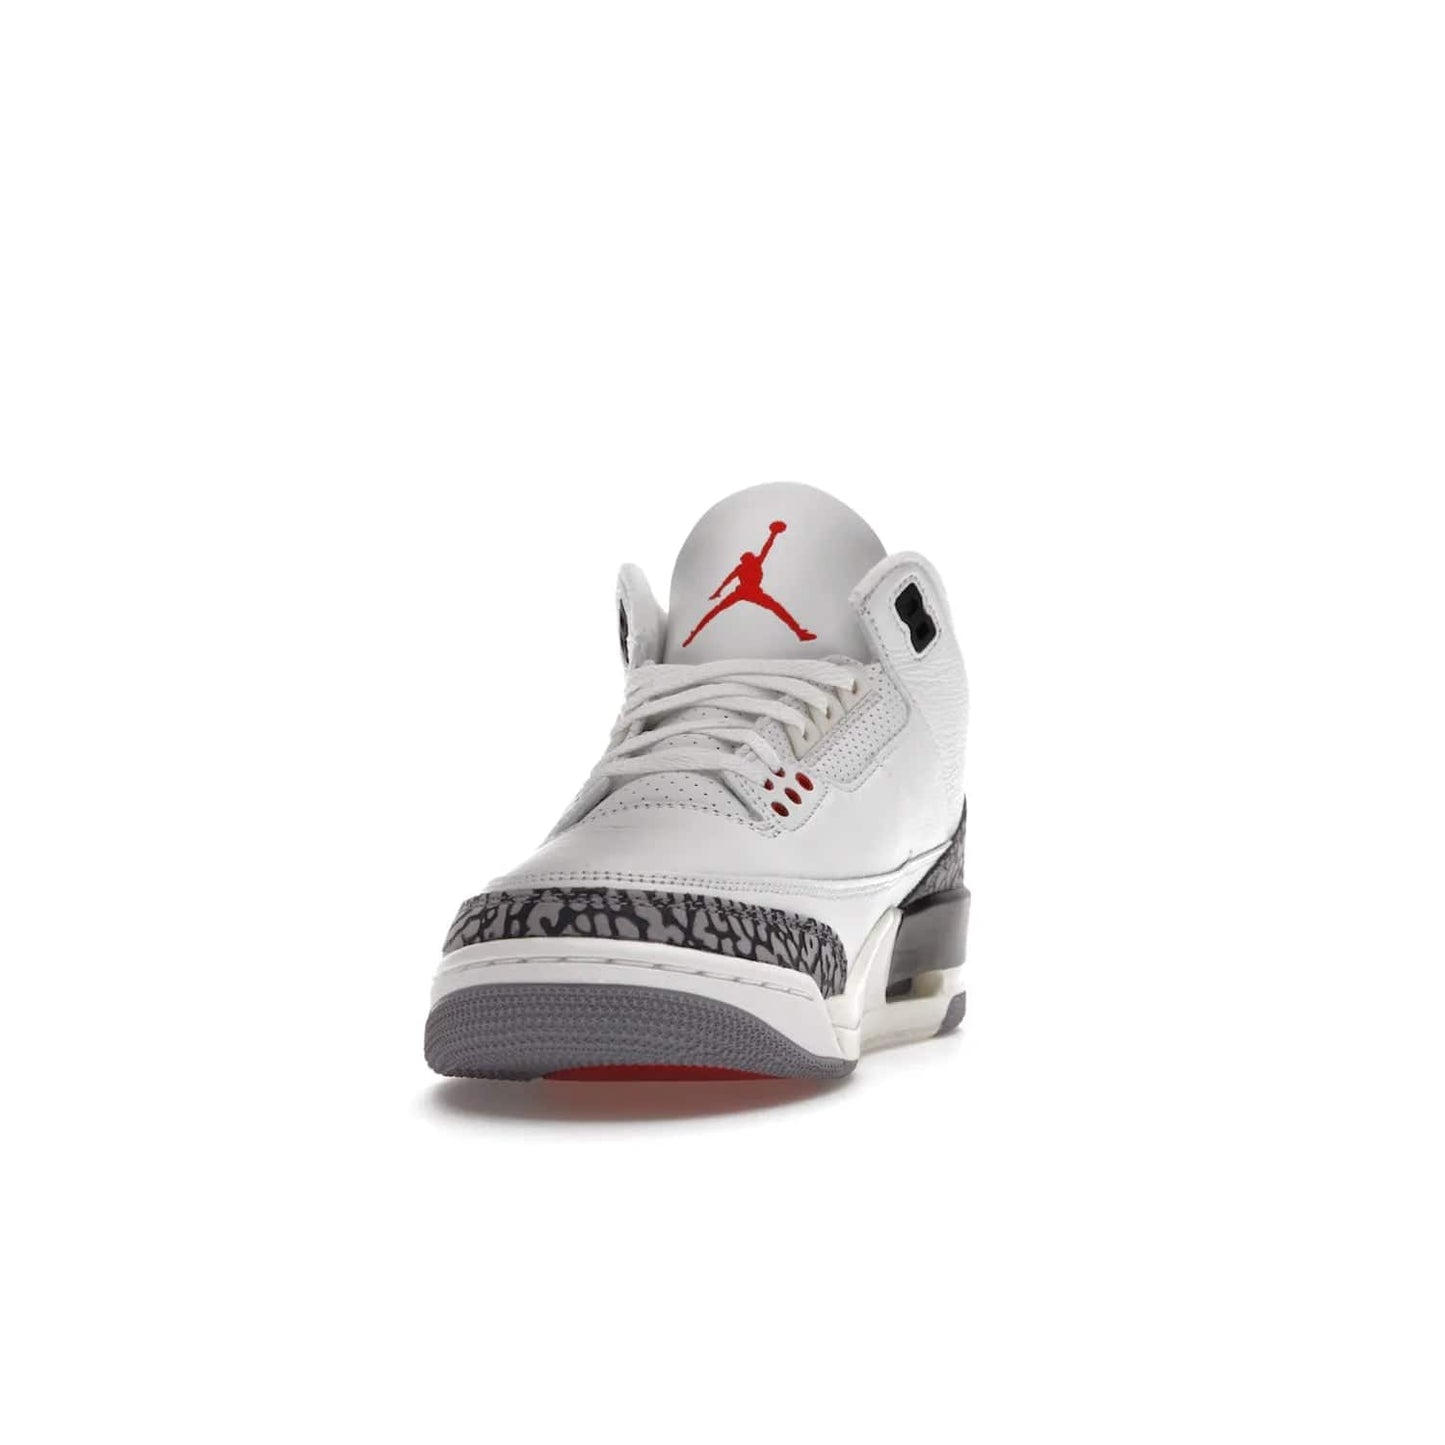 Jordan 3 Retro White Cement Reimagined - Image 12 - Only at www.BallersClubKickz.com - The Reimagined Air Jordan 3 Retro in a Summit White/Fire Red/Black/Cement Grey colorway is launching on March 11, 2023. Featuring a white leather upper, off-white midsoles and heel tabs, this vintage-look sneaker is a must-have.